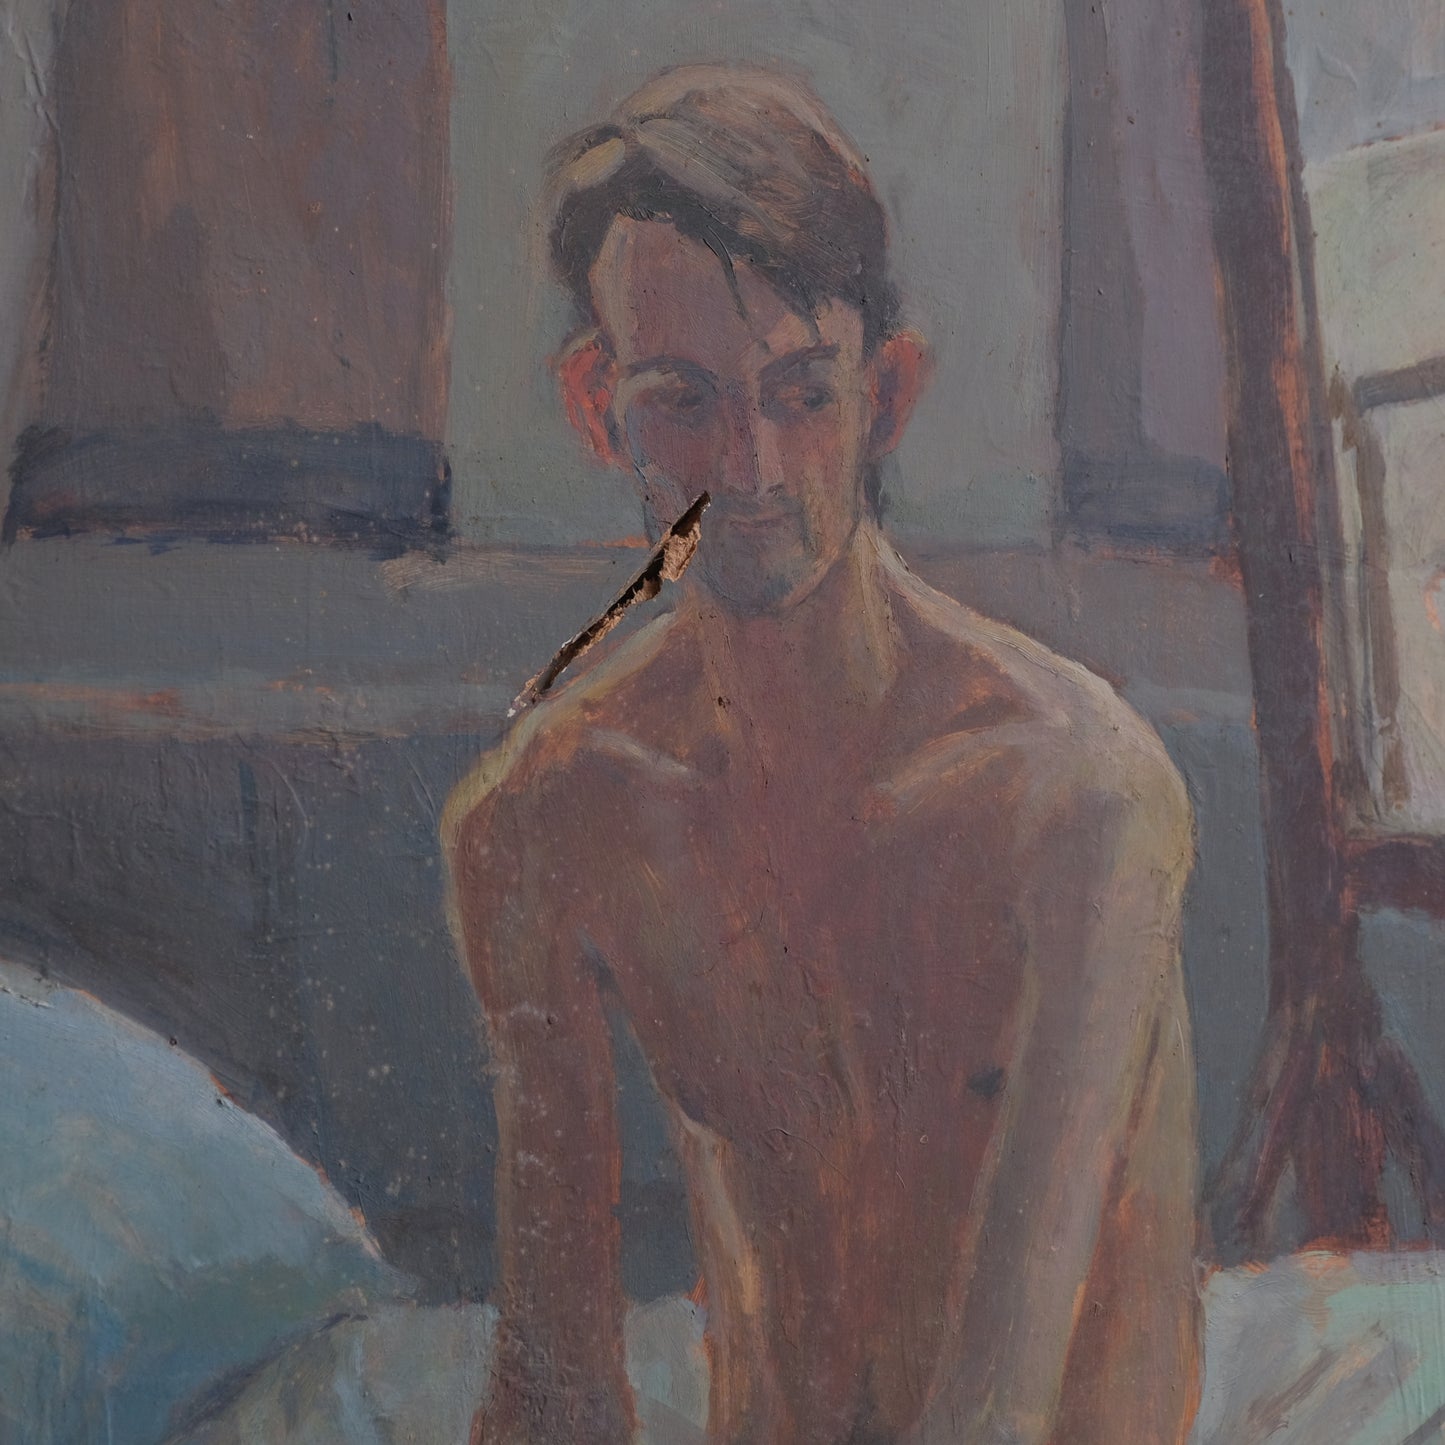 Man on bed painting